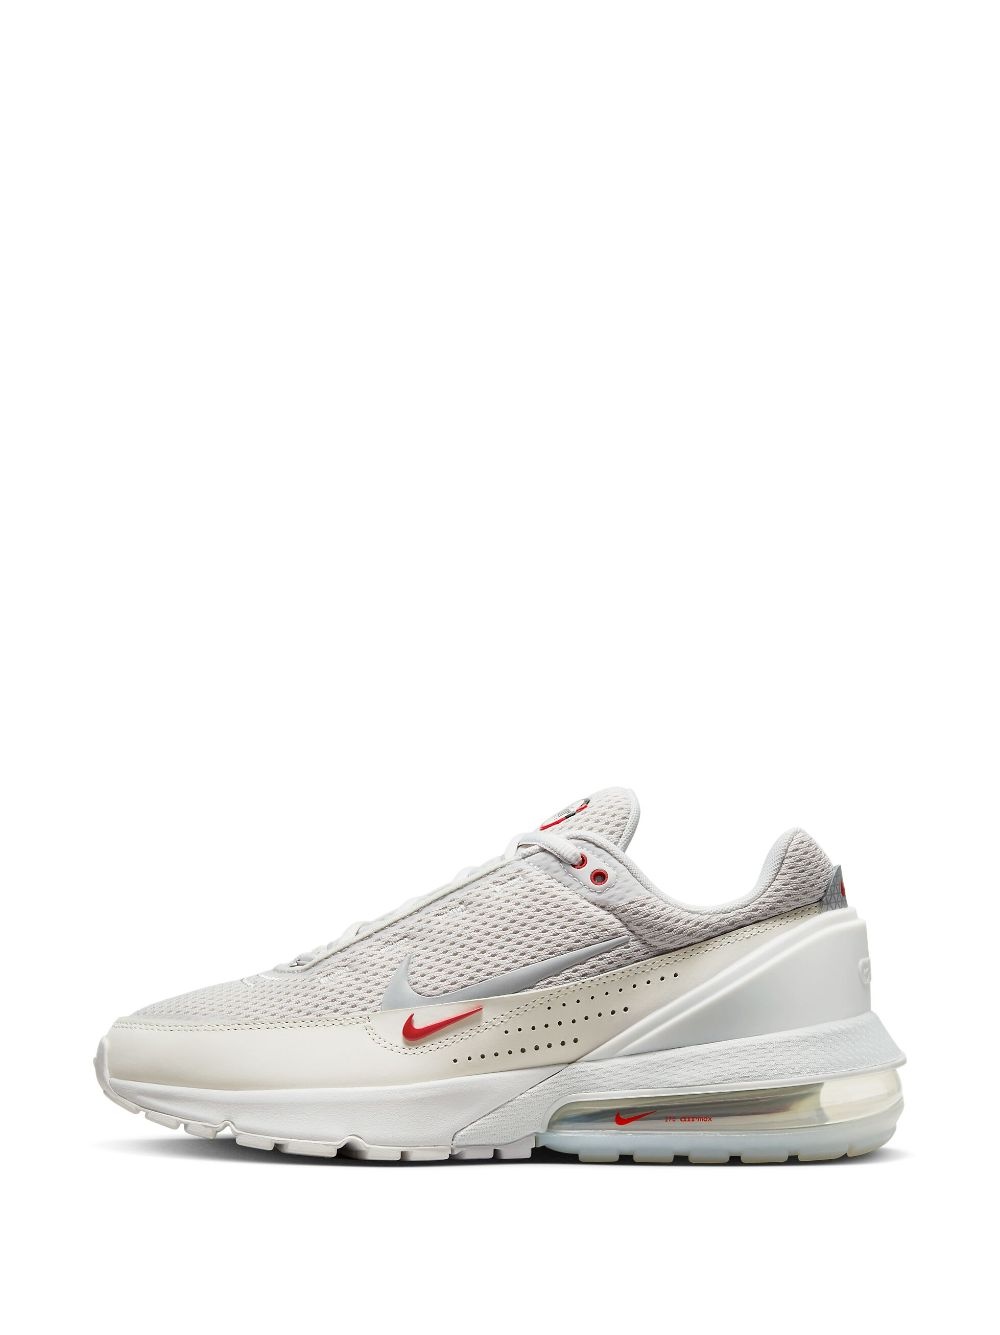 Air Max Pulse "Photon Dust" sneakers - 5